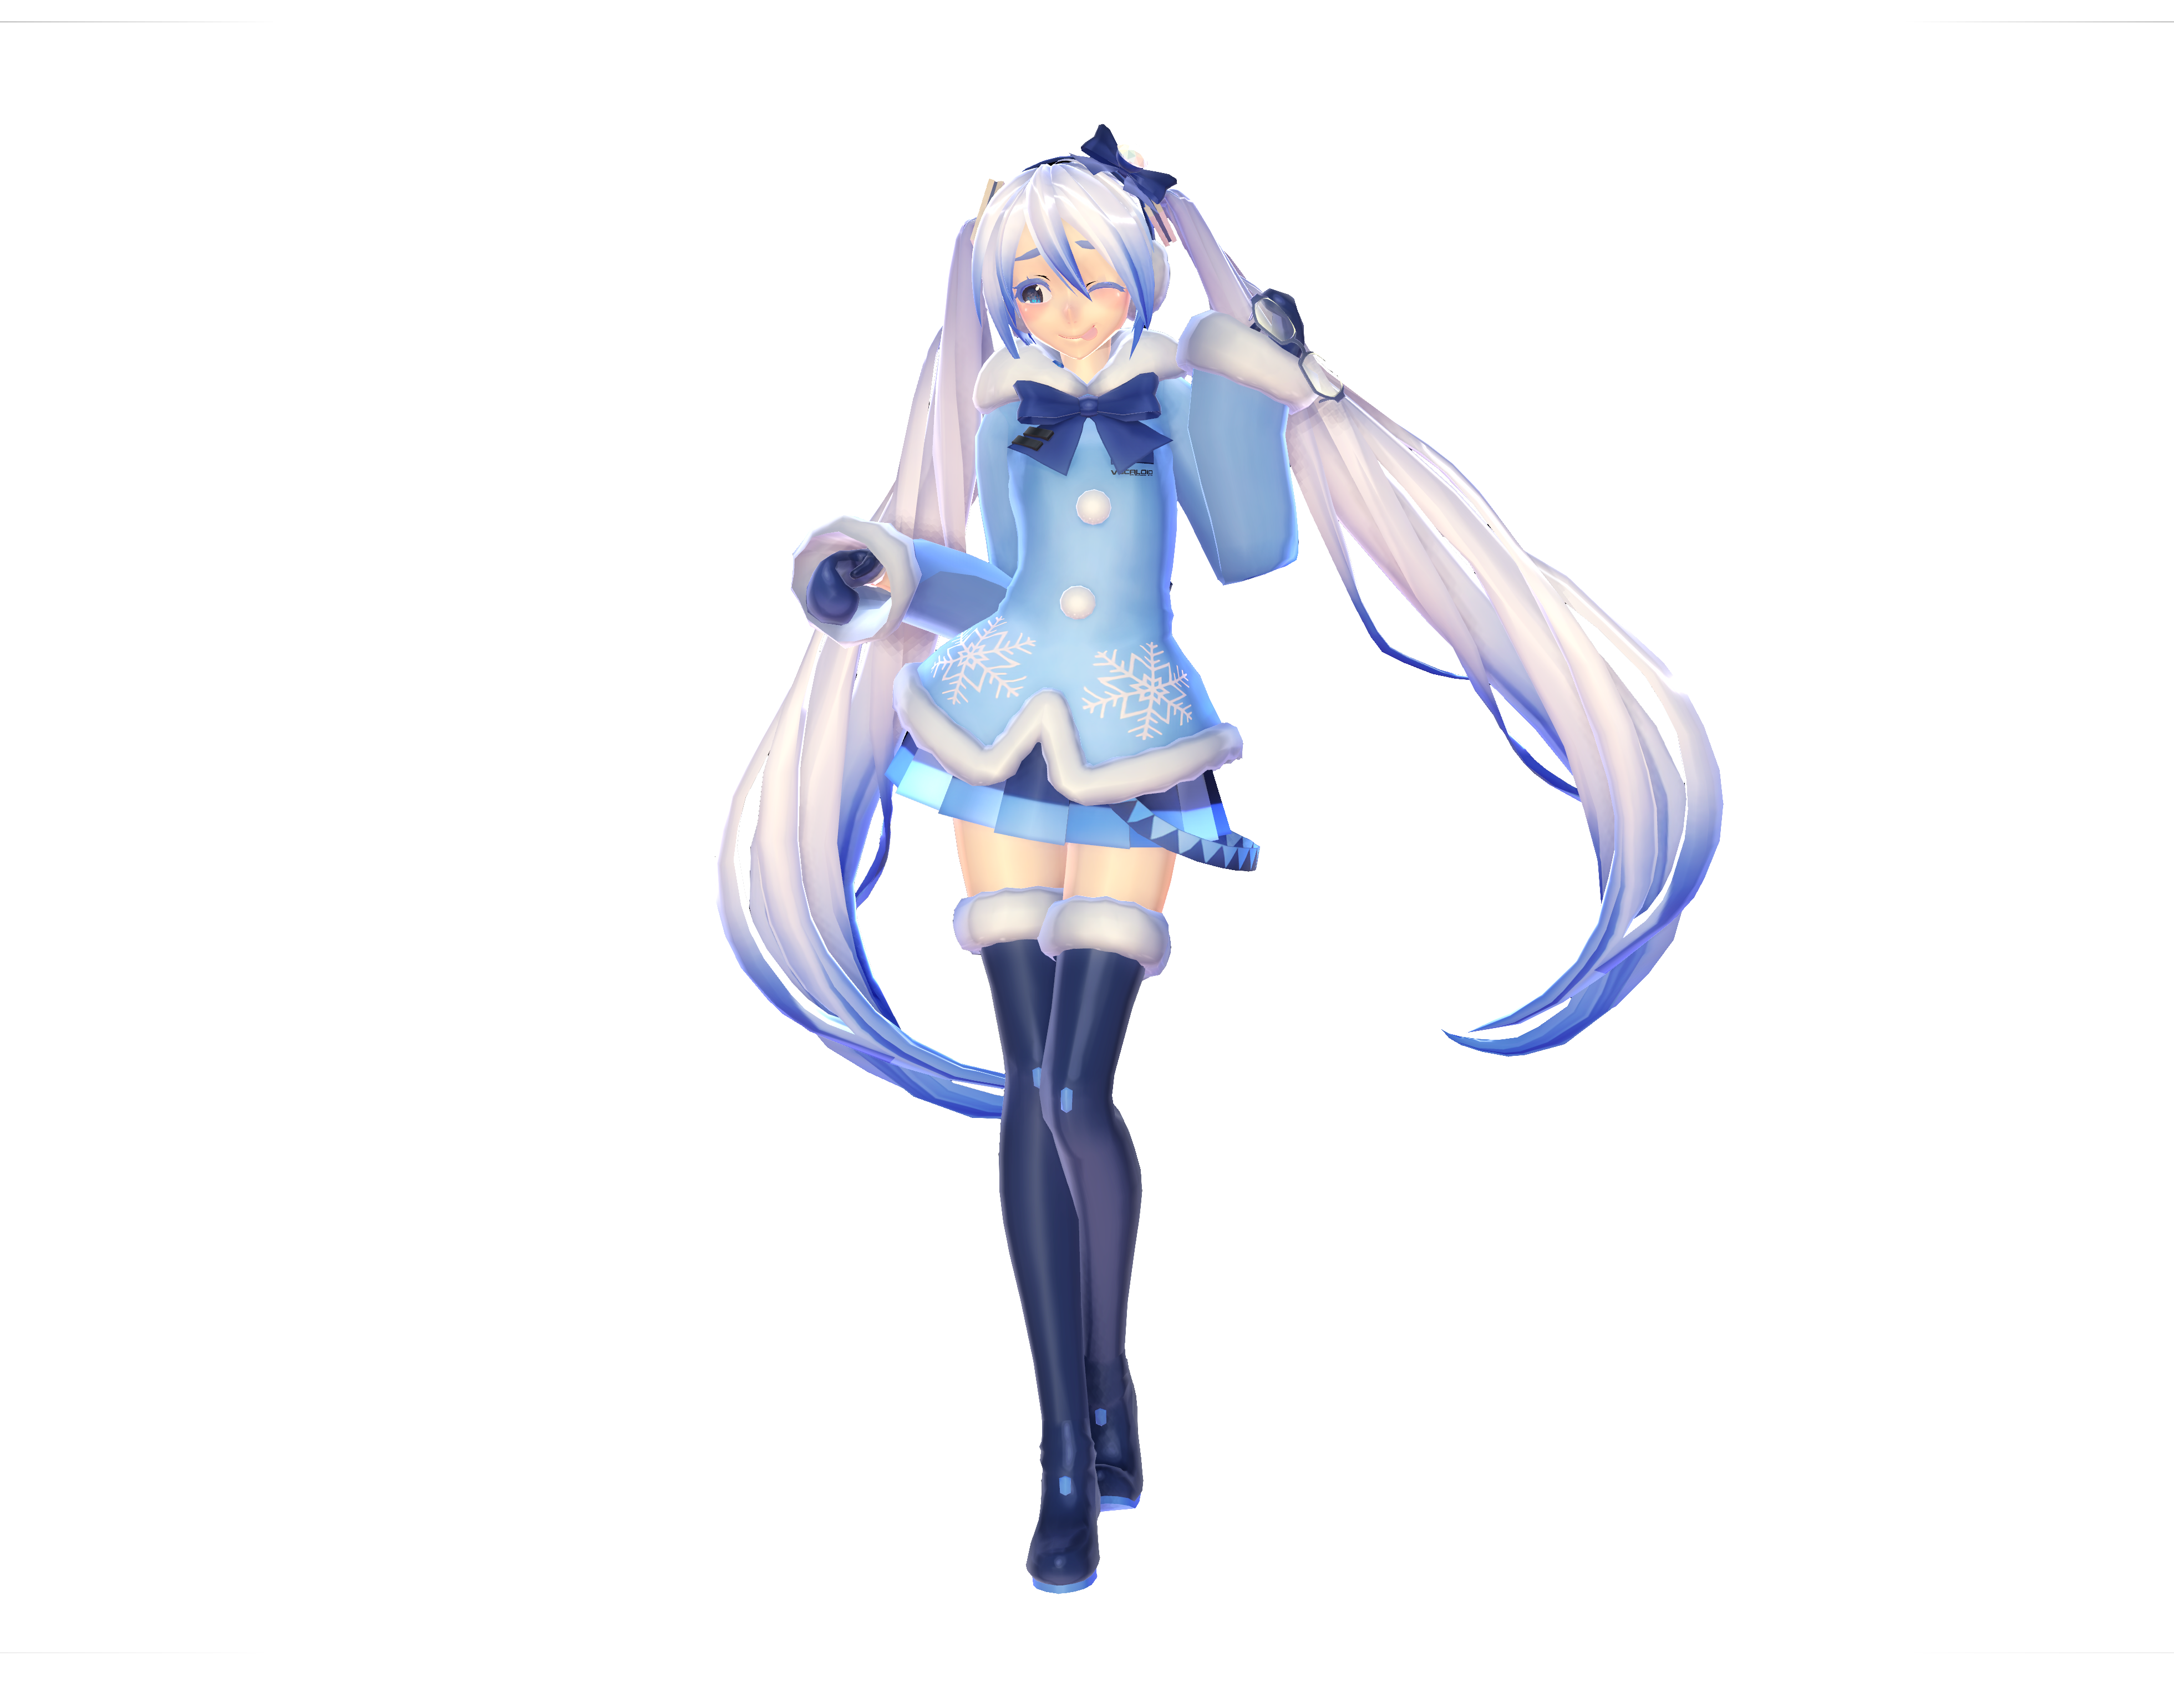 Mmd Model Download Snowmiku12 Dl Down By Cheeseycheesecake On